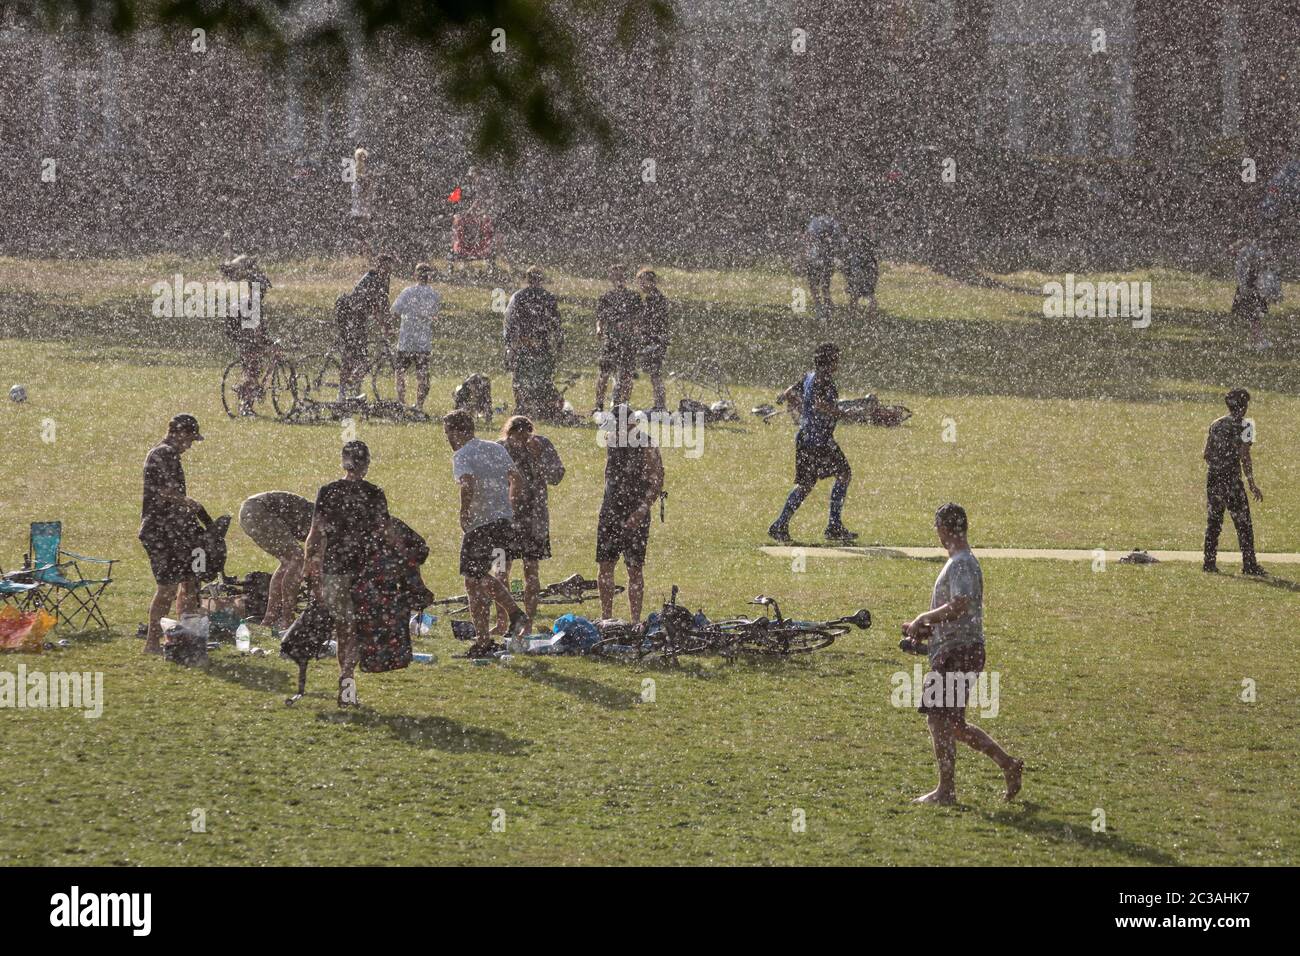 After an afternoon of sunshine and warm temperatures during the continuing UK Coronavirus lockdown, a sudden and torrential downpour of rain catches park users by surprise, in Ruskin Park, a public green space in Lambeth, on 14th June 2020, in London, England. The current UK Covid-19 death toll now stands at 41,662, an increase over the last 24 hours of 181, although Prime Minister Boris Johnson is coming under pressure to review the case for a reduction of the 2 metre social distance rule, due to its effect on jobs and wider economy. Stock Photo